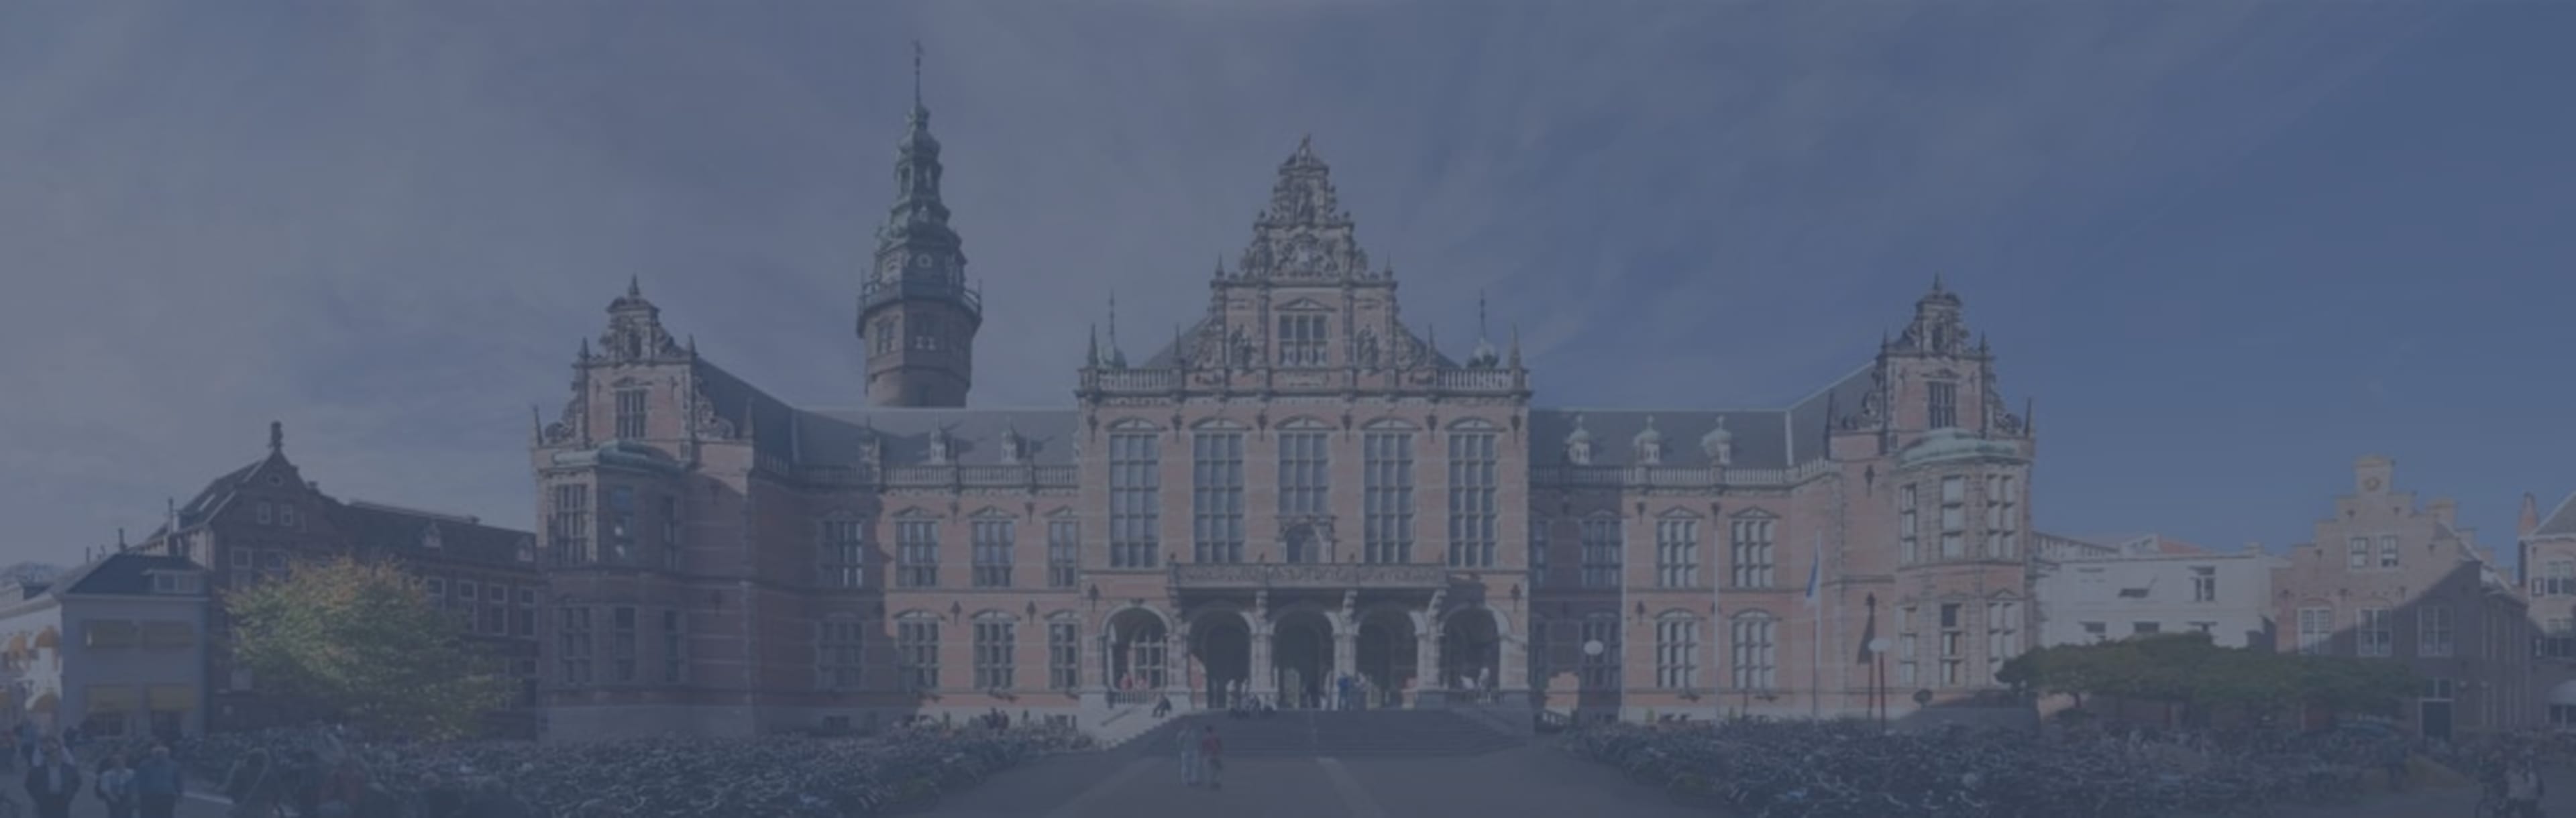 University of Groningen LLM Technology Law and Innovation